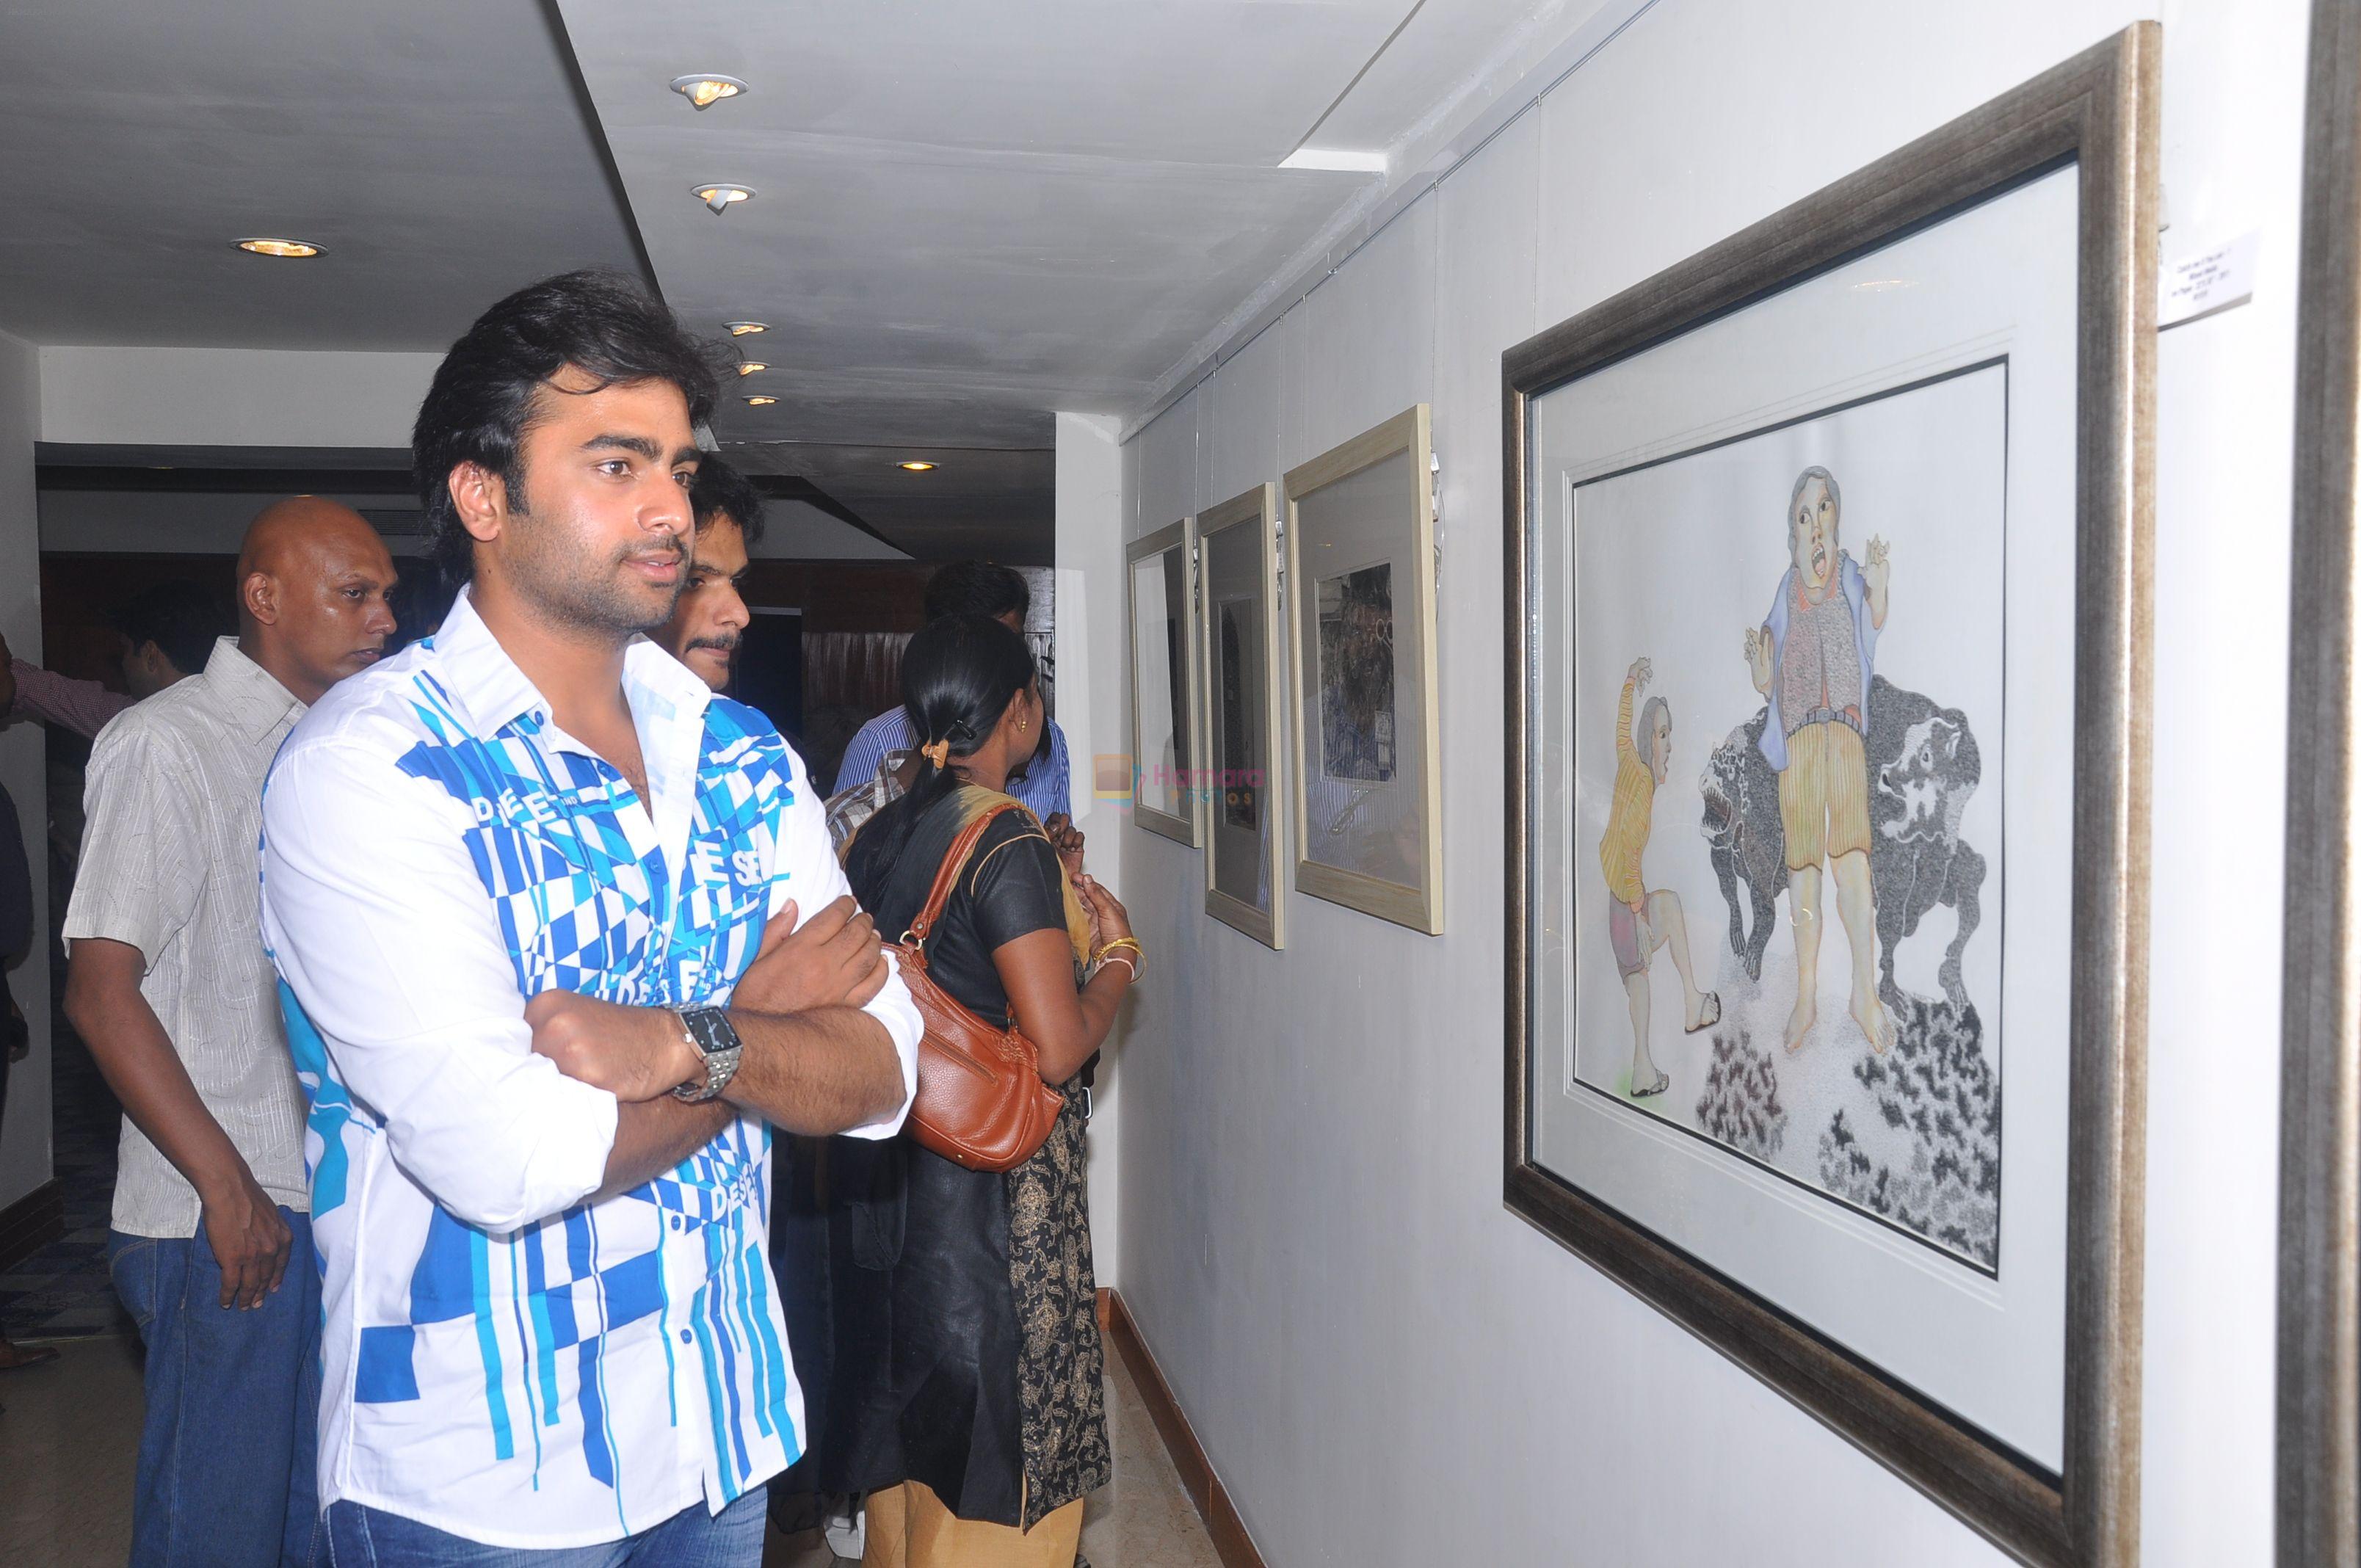 Nara Rohit attends Muse the Art Gallery Group Show Multiversal at Marriot Hotel on 16th September 2011